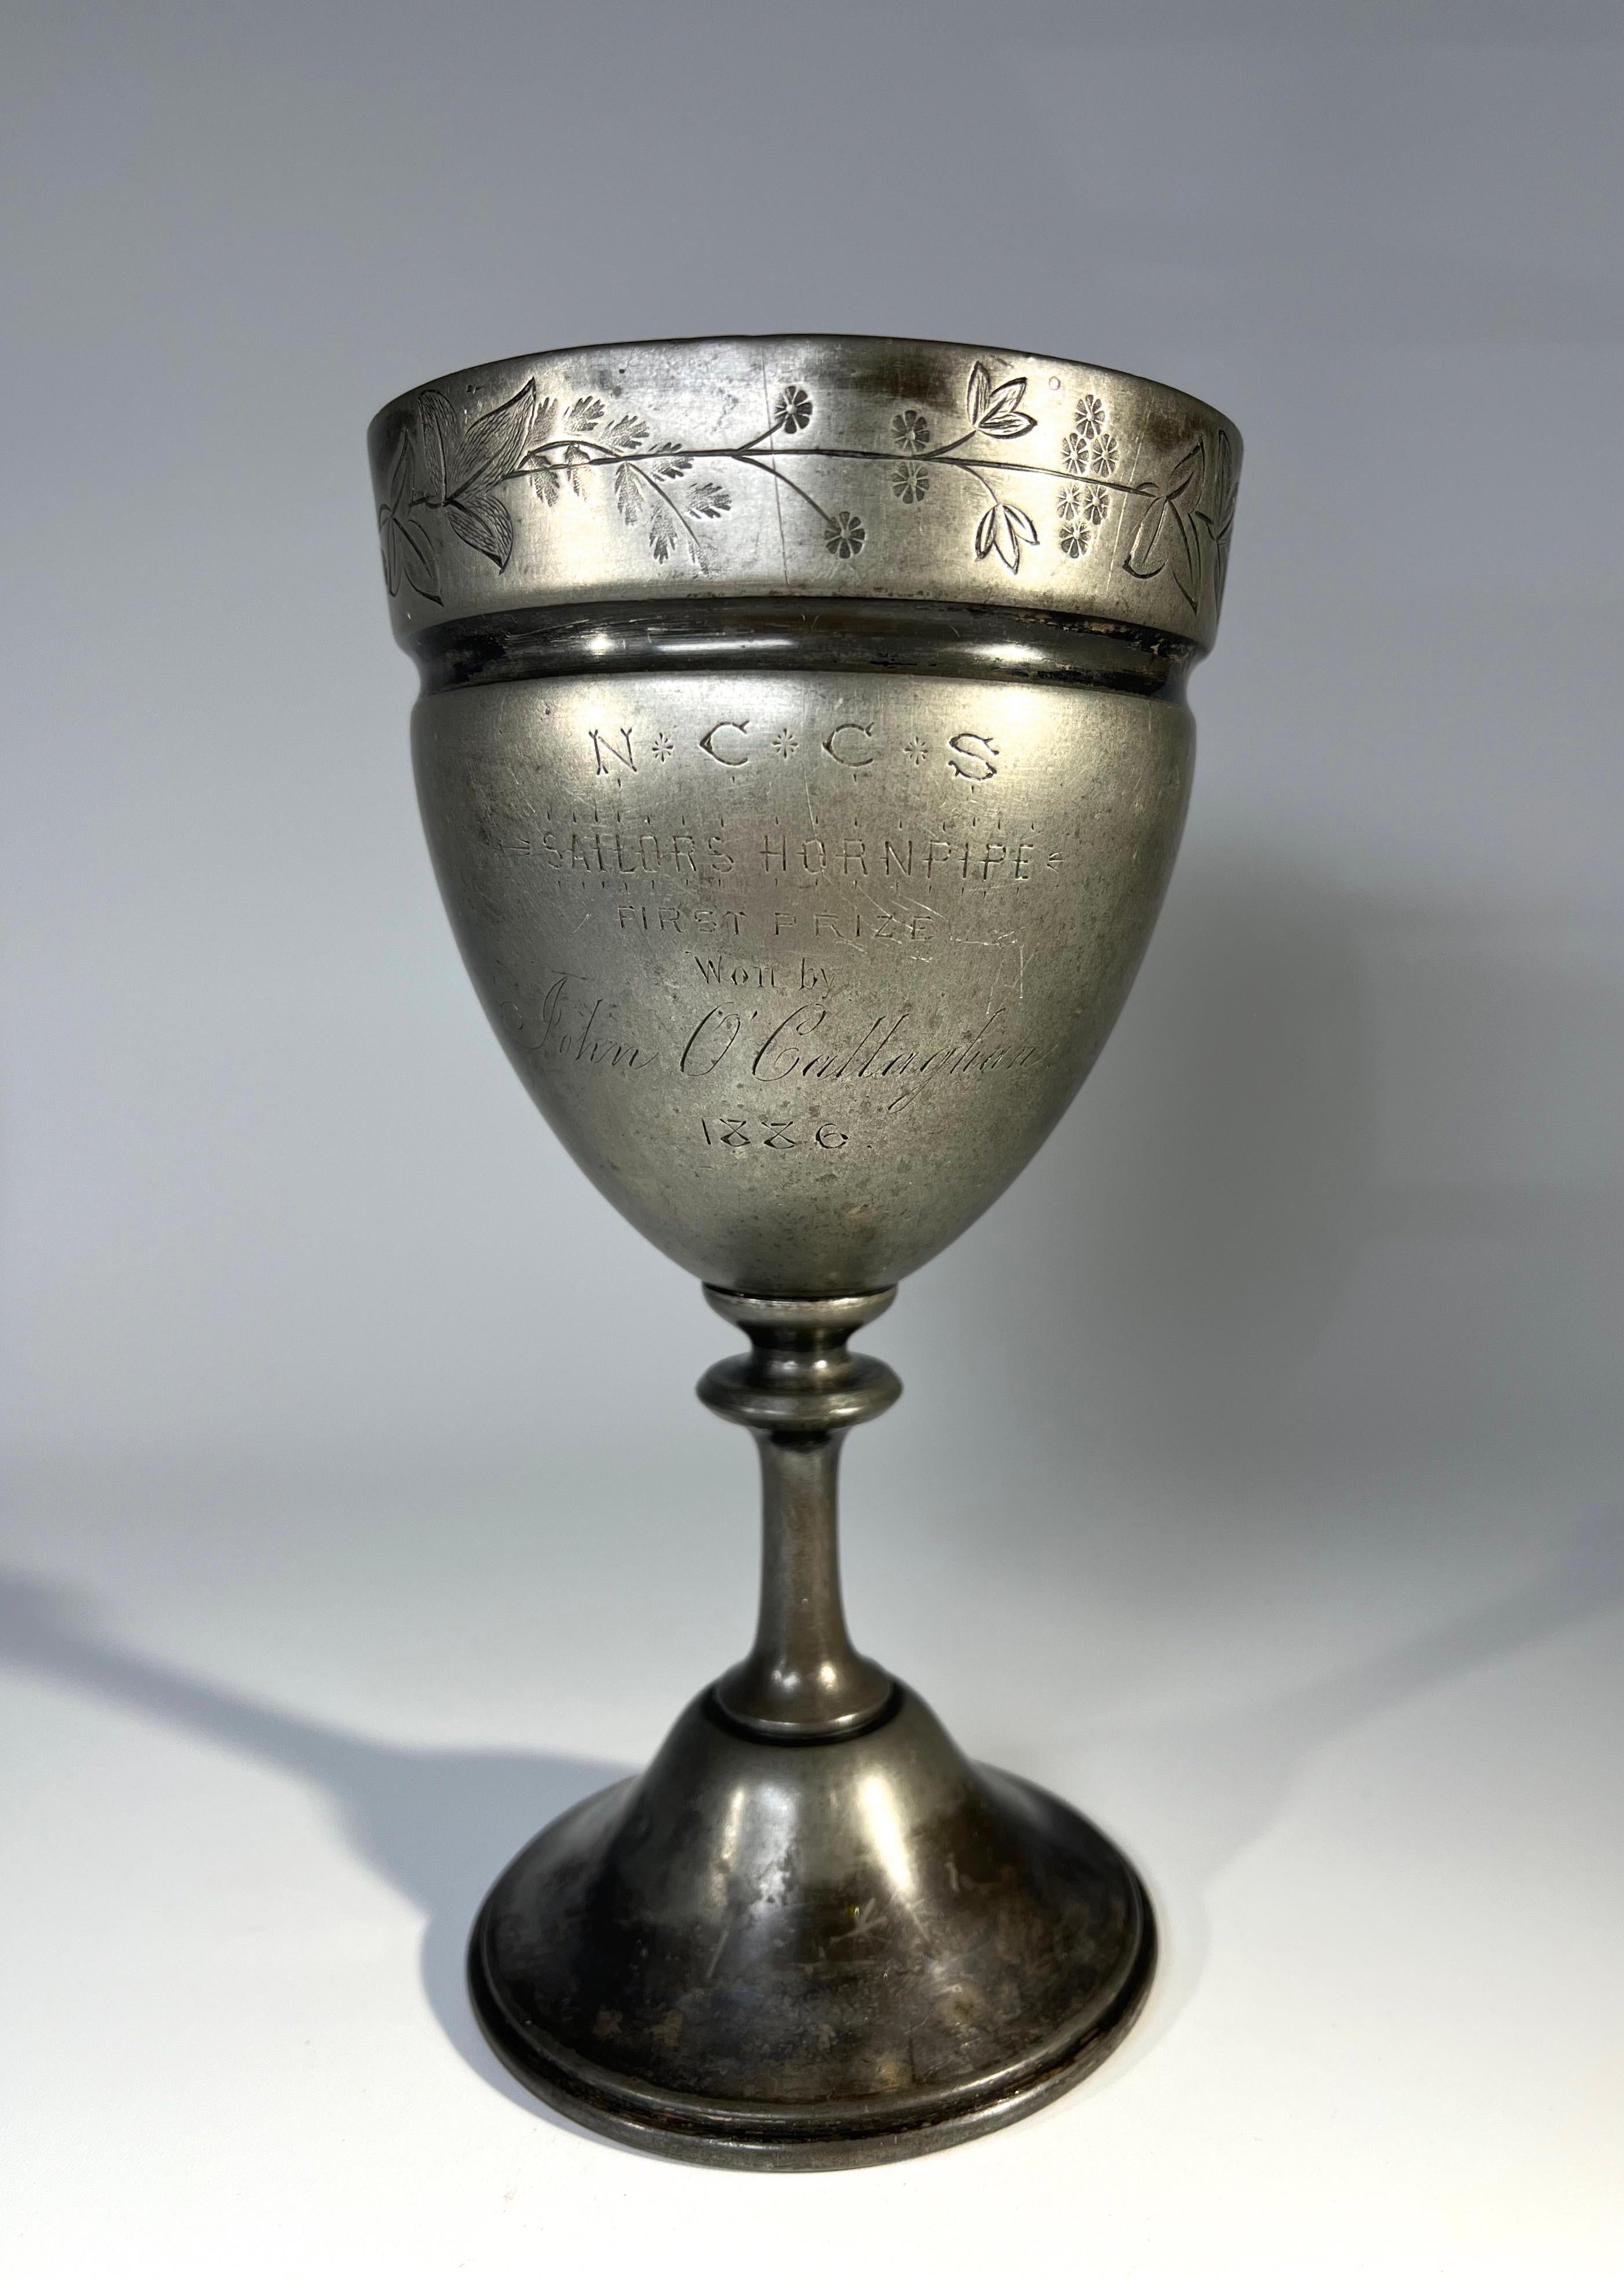 Antique chalice trophy inscribed, NCCS Sailors Hornpipe, First Prize Won By John O'Callaghan. 1886
A terrific conversation piece
Likely to be silver plate, Meriden Britannia Company specialised in silver plate ware
Circa 1886
Signed Meriden B